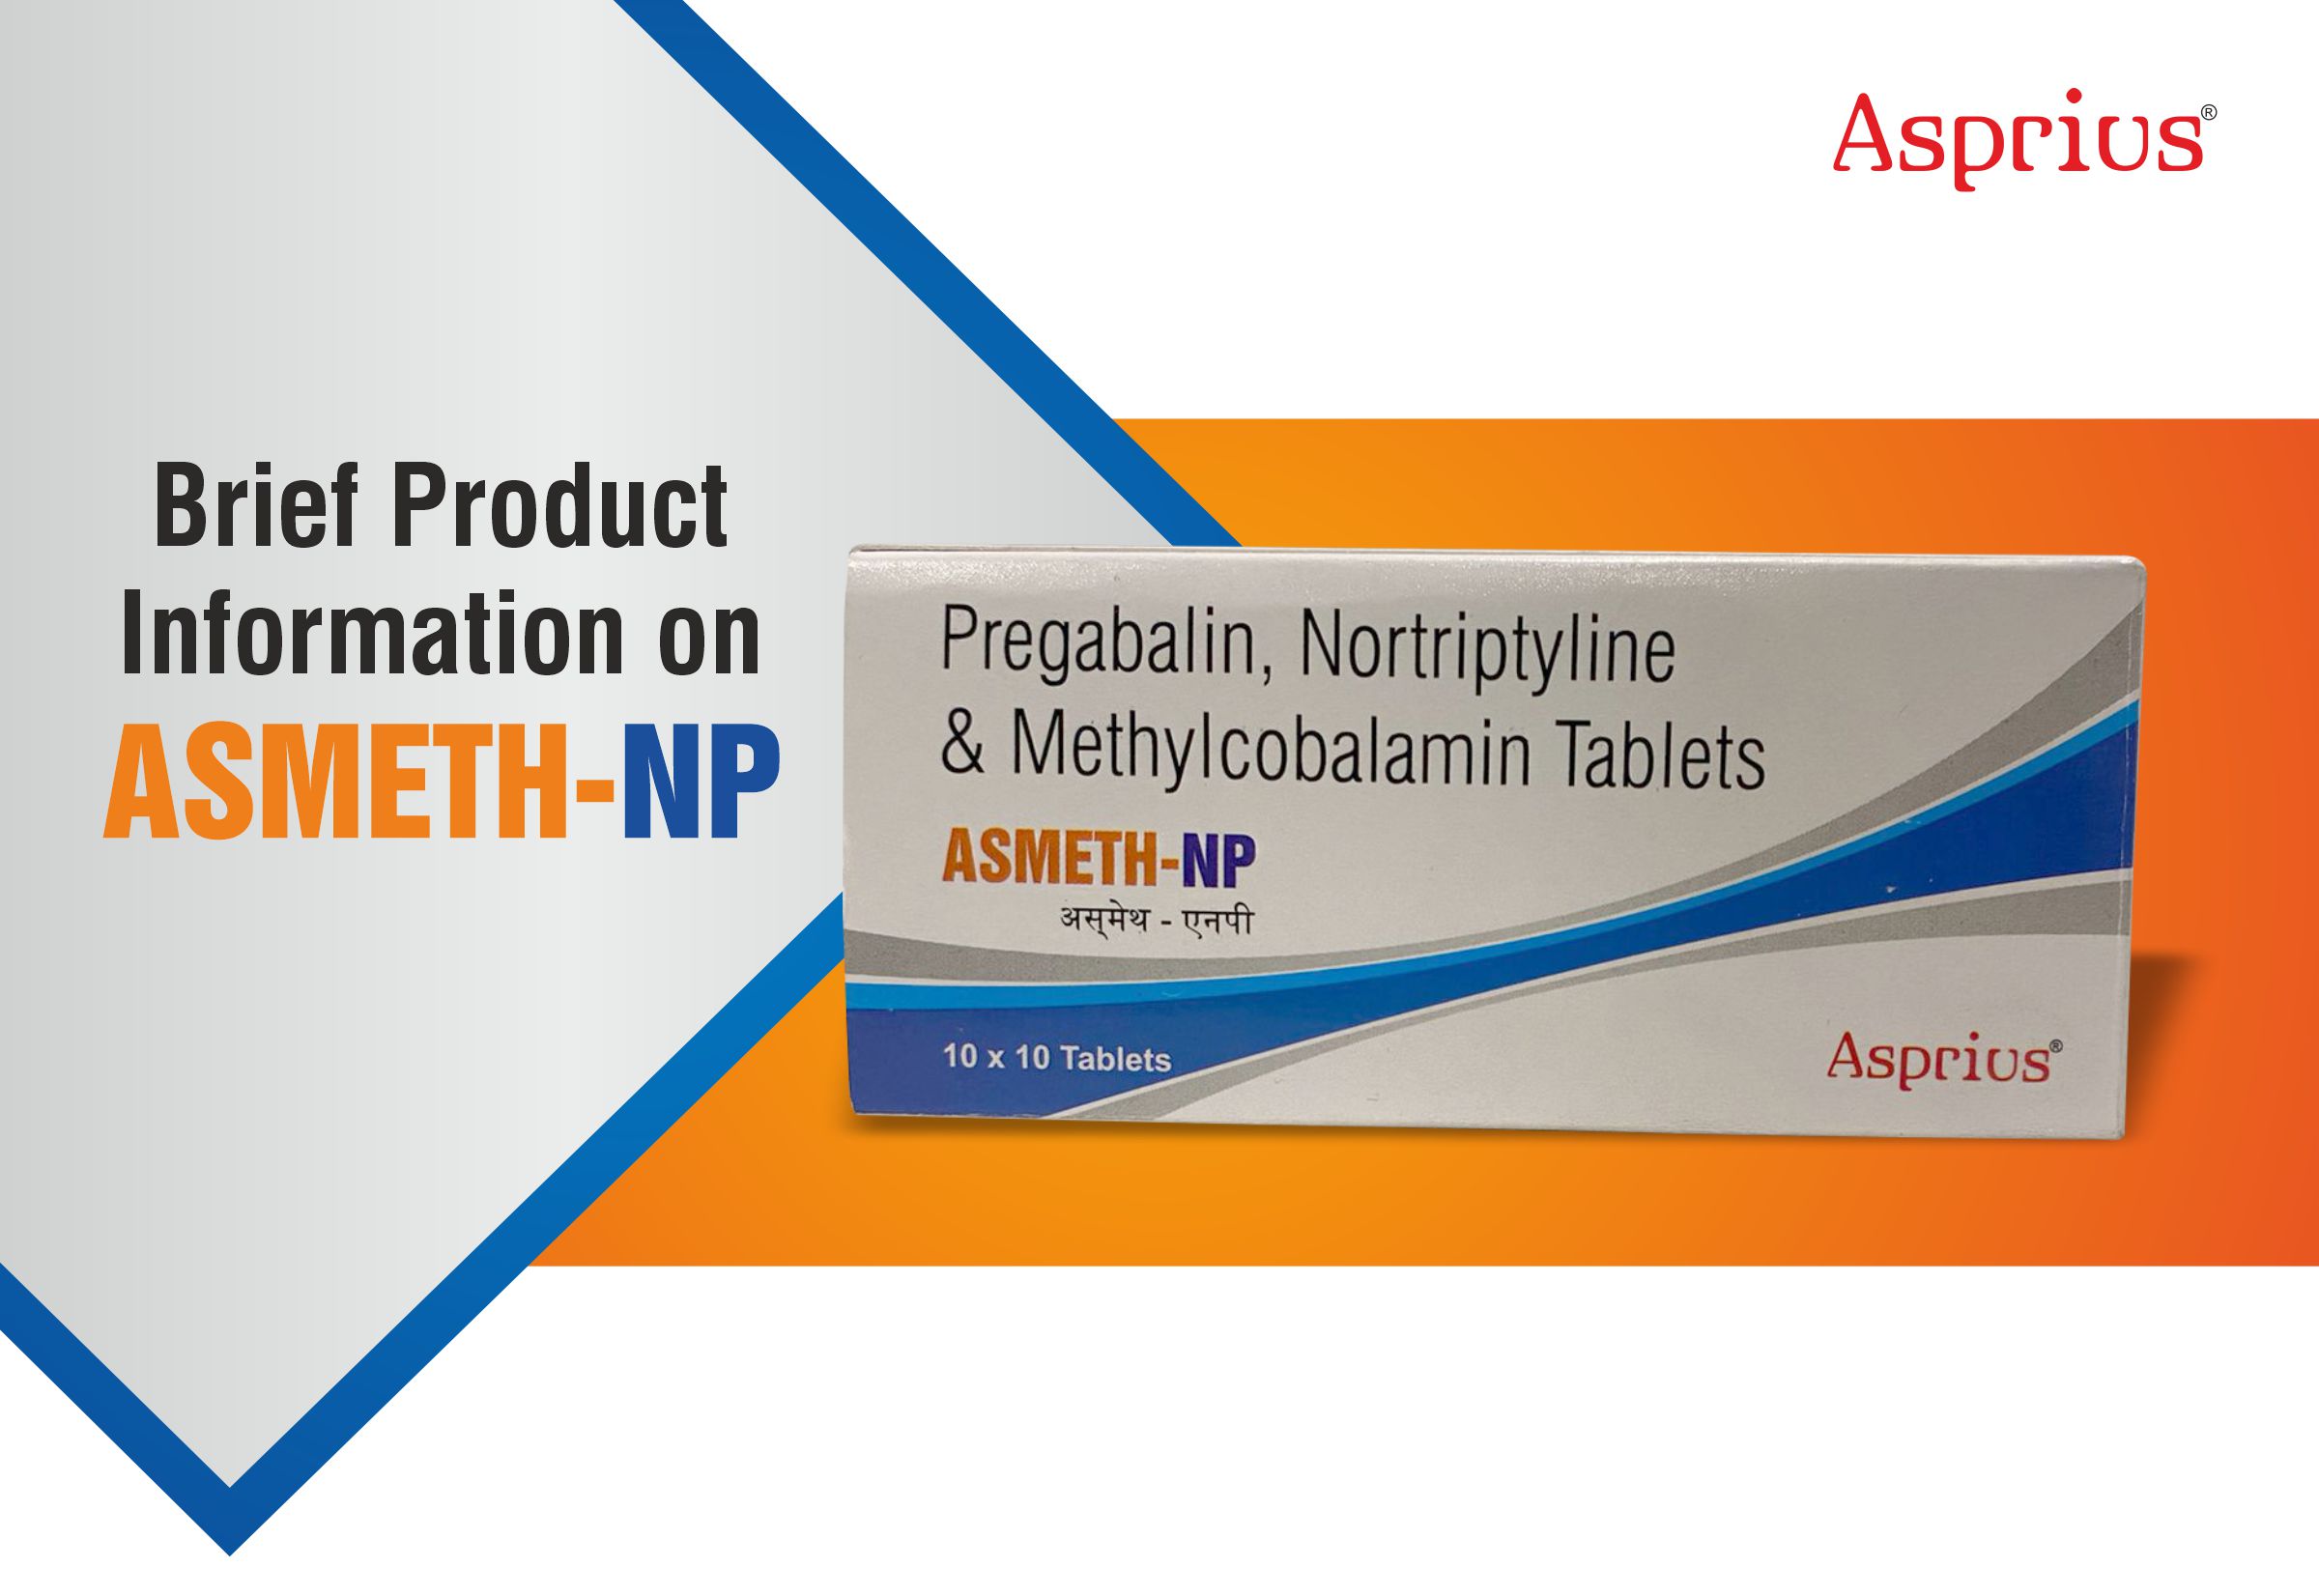 Brief Product Information on ASMETH-NP